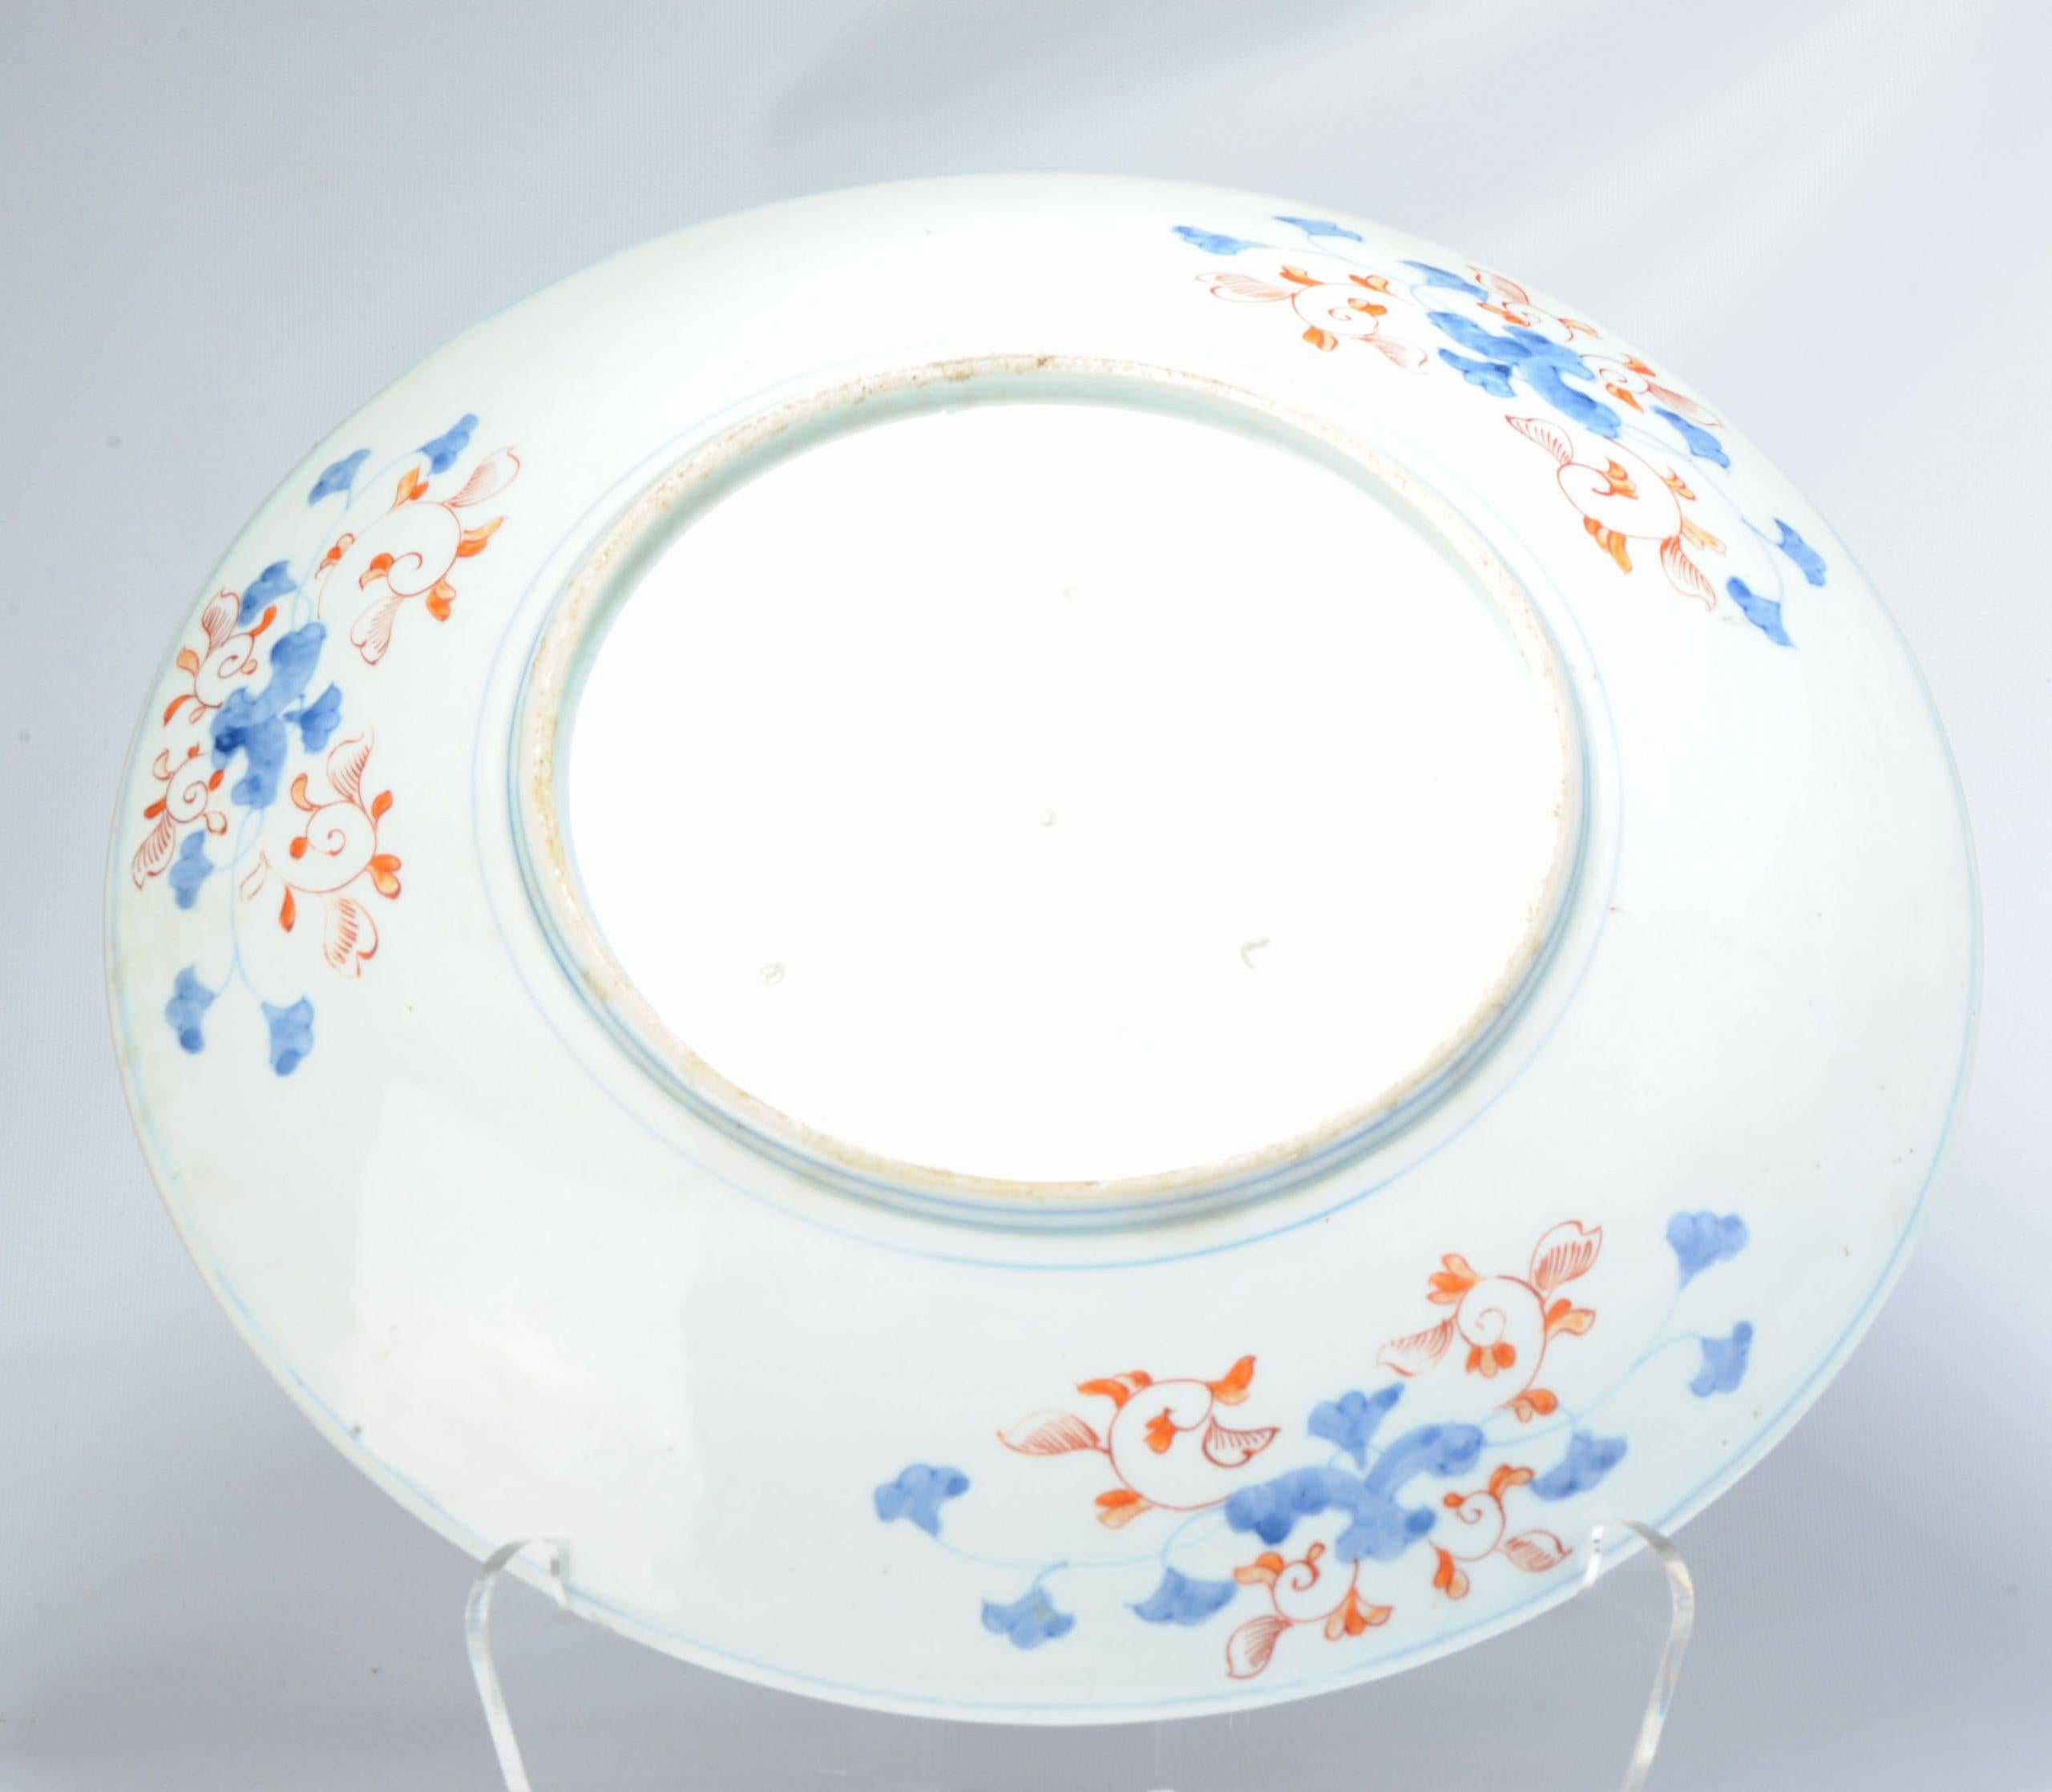 Very lovely piece with a nicely painted scene of wisteria, dragon and bird in a flowering landscape.

Additional information:
Material: Porcelain & Pottery
Region of Origin: Plates
Period: 19th century Meiji Periode (1867-1912)
Age: ca